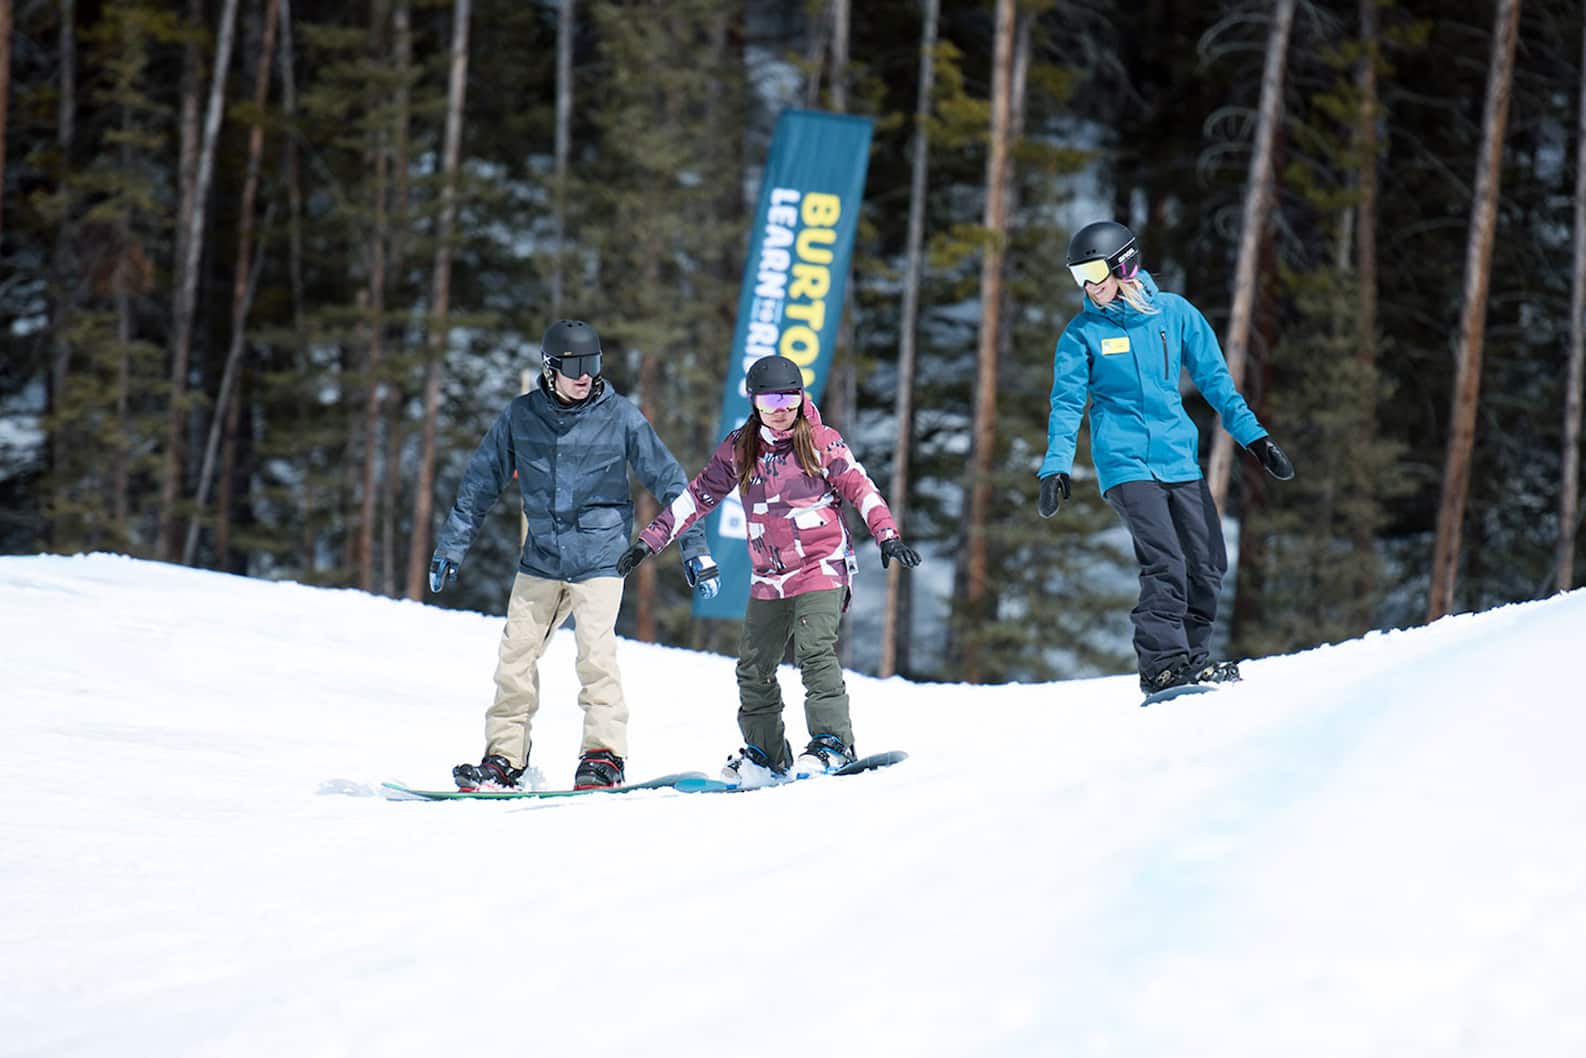 5 Reasons to Visit a Burton Learn to Ride Center | Burton Snowboards